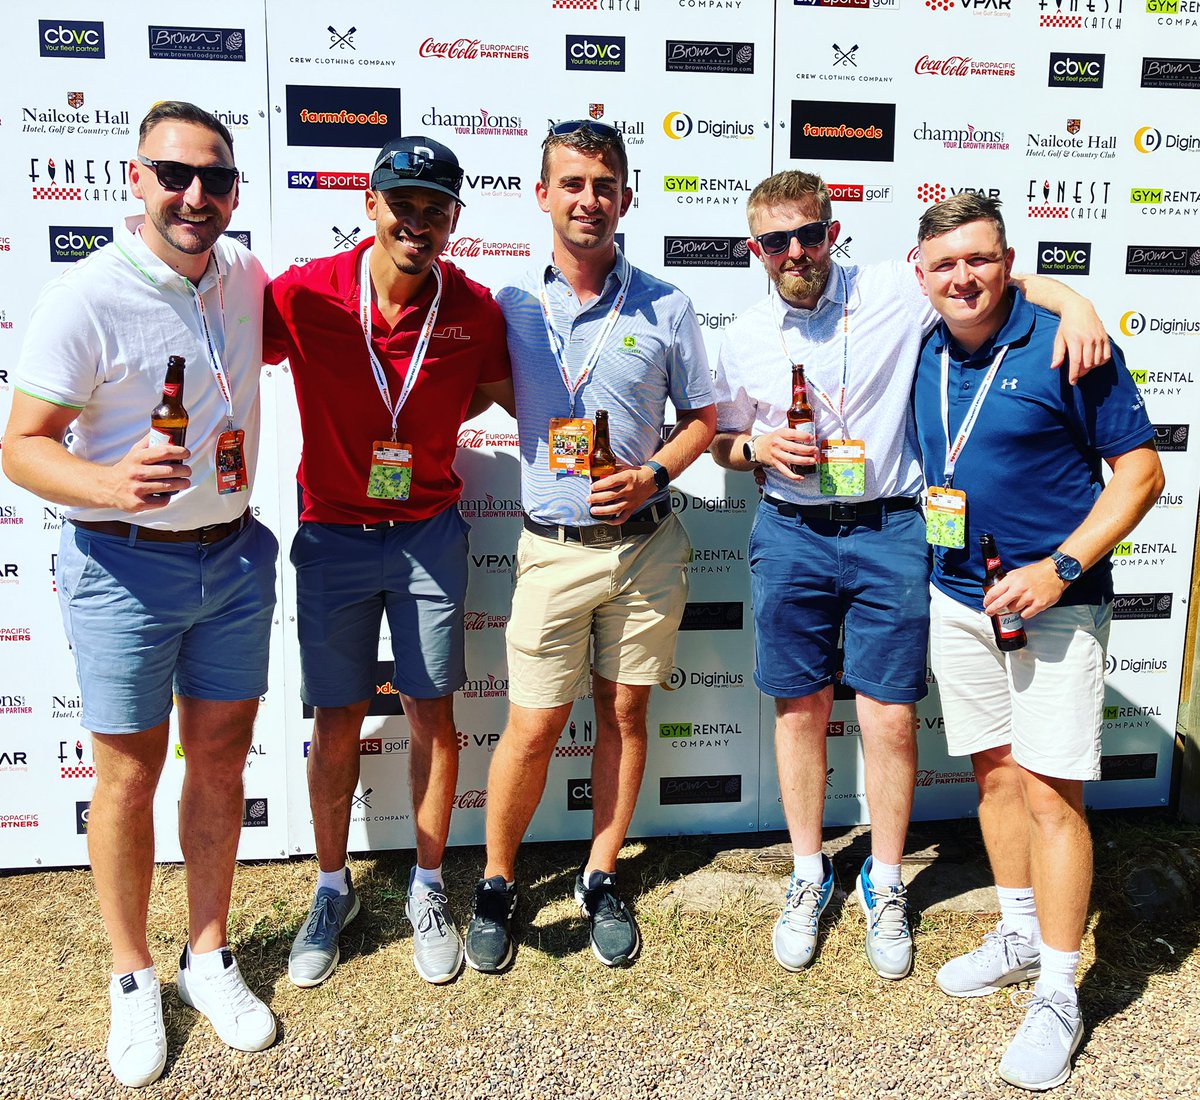 Great morning round for team Farol Golf, clubhouse leaders with a score of -8 

Thanks to @OdemwingieP for the great company let’s hope we hold on to the lead throughout the day!! 

#teamfarolgolf